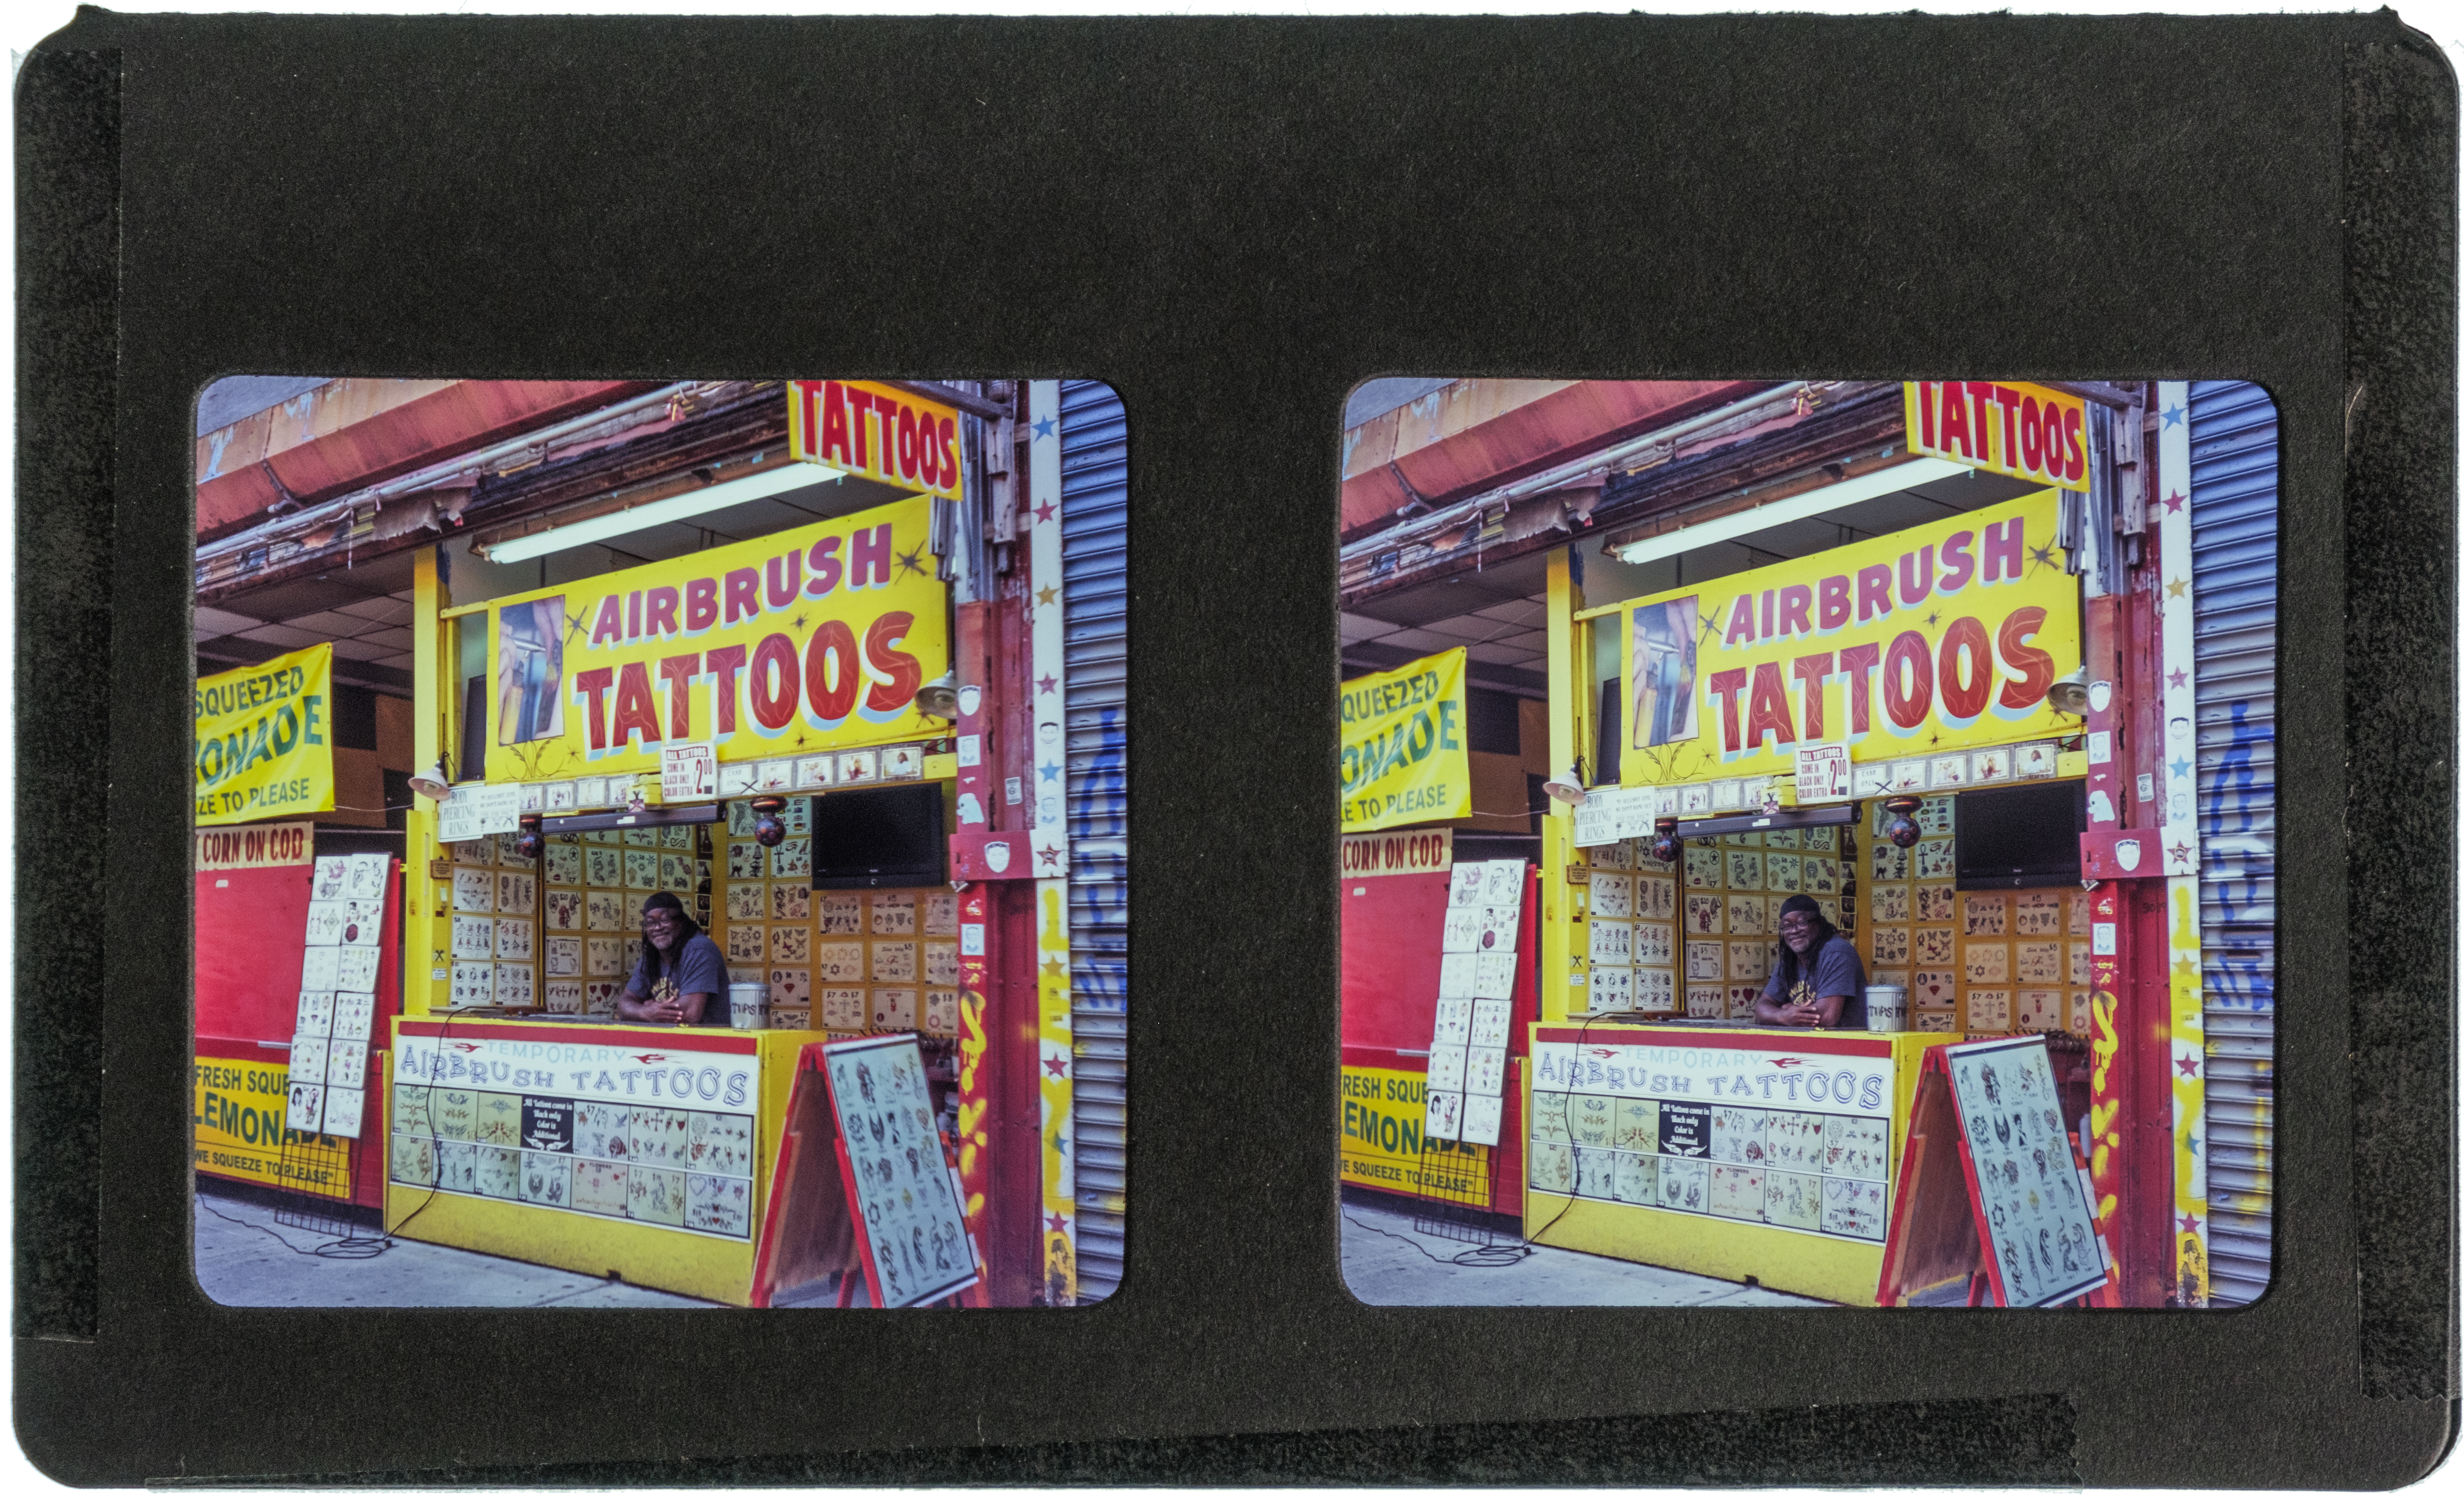 Example of a medium format stereo image made on Kodak Ektachrome 100  film.  The card is 6x13. Each frame is an individual 6x6 image.  